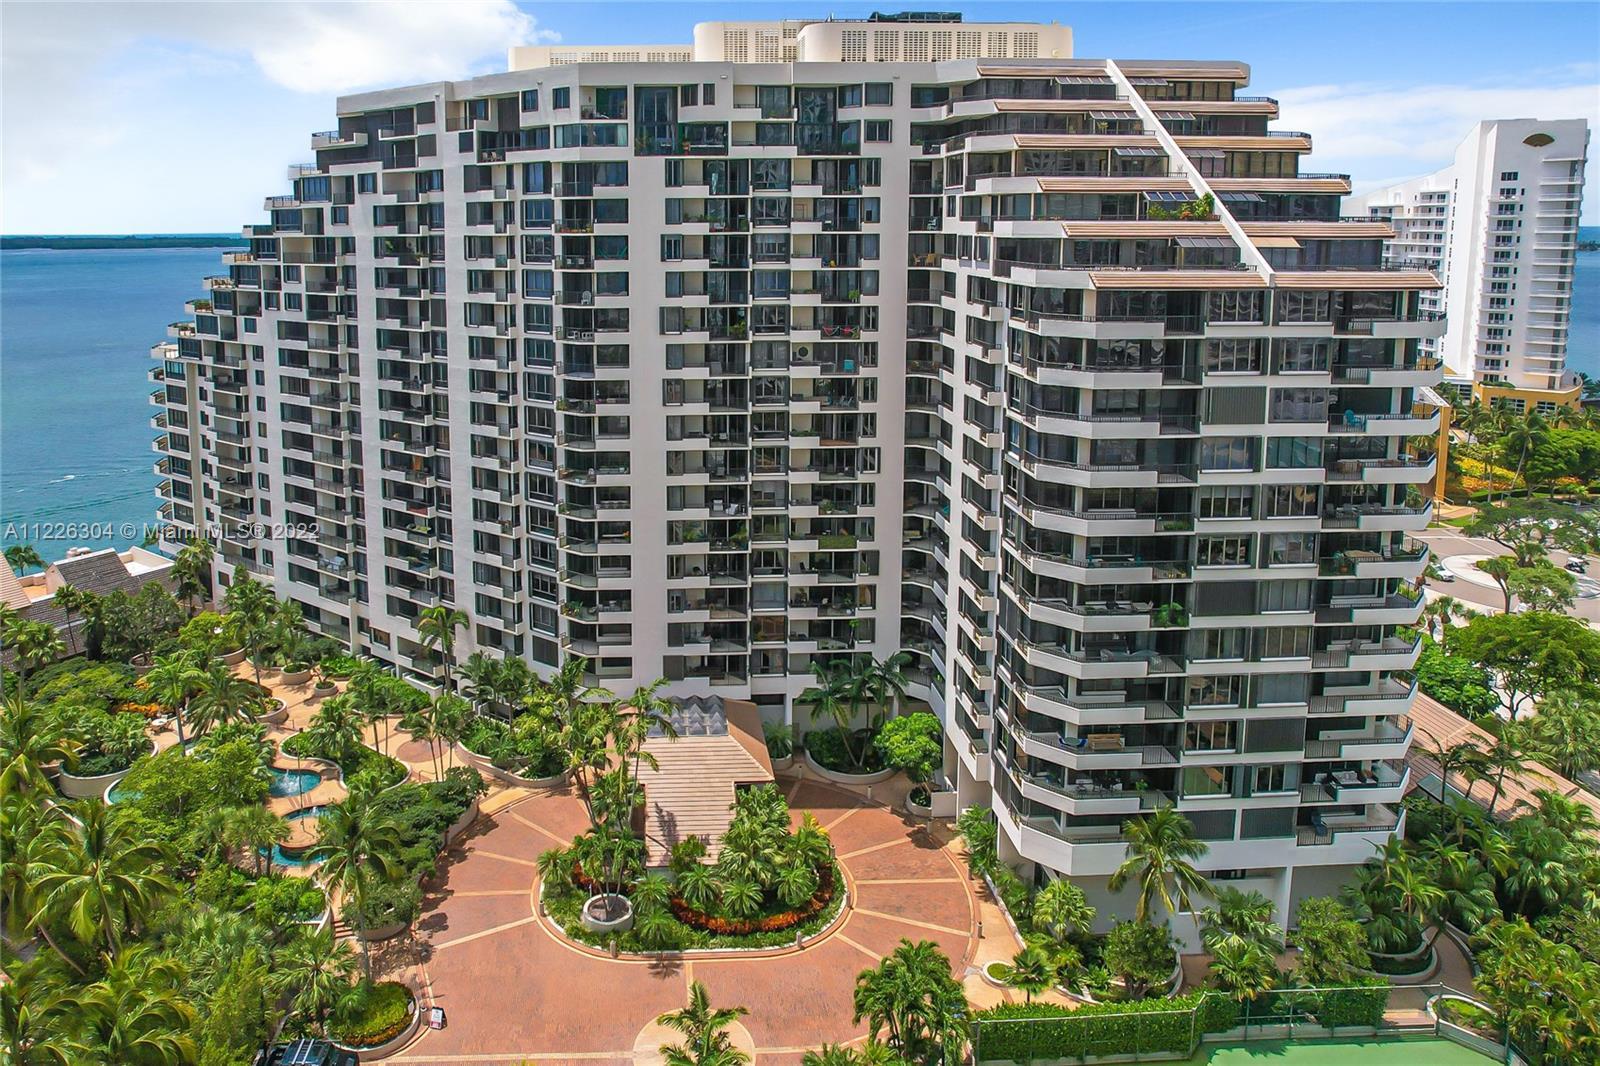 Beautiful  1 bedroom Unit remodeled overlooking a spectacular view of Biscayne Bay & Brickell Area. 